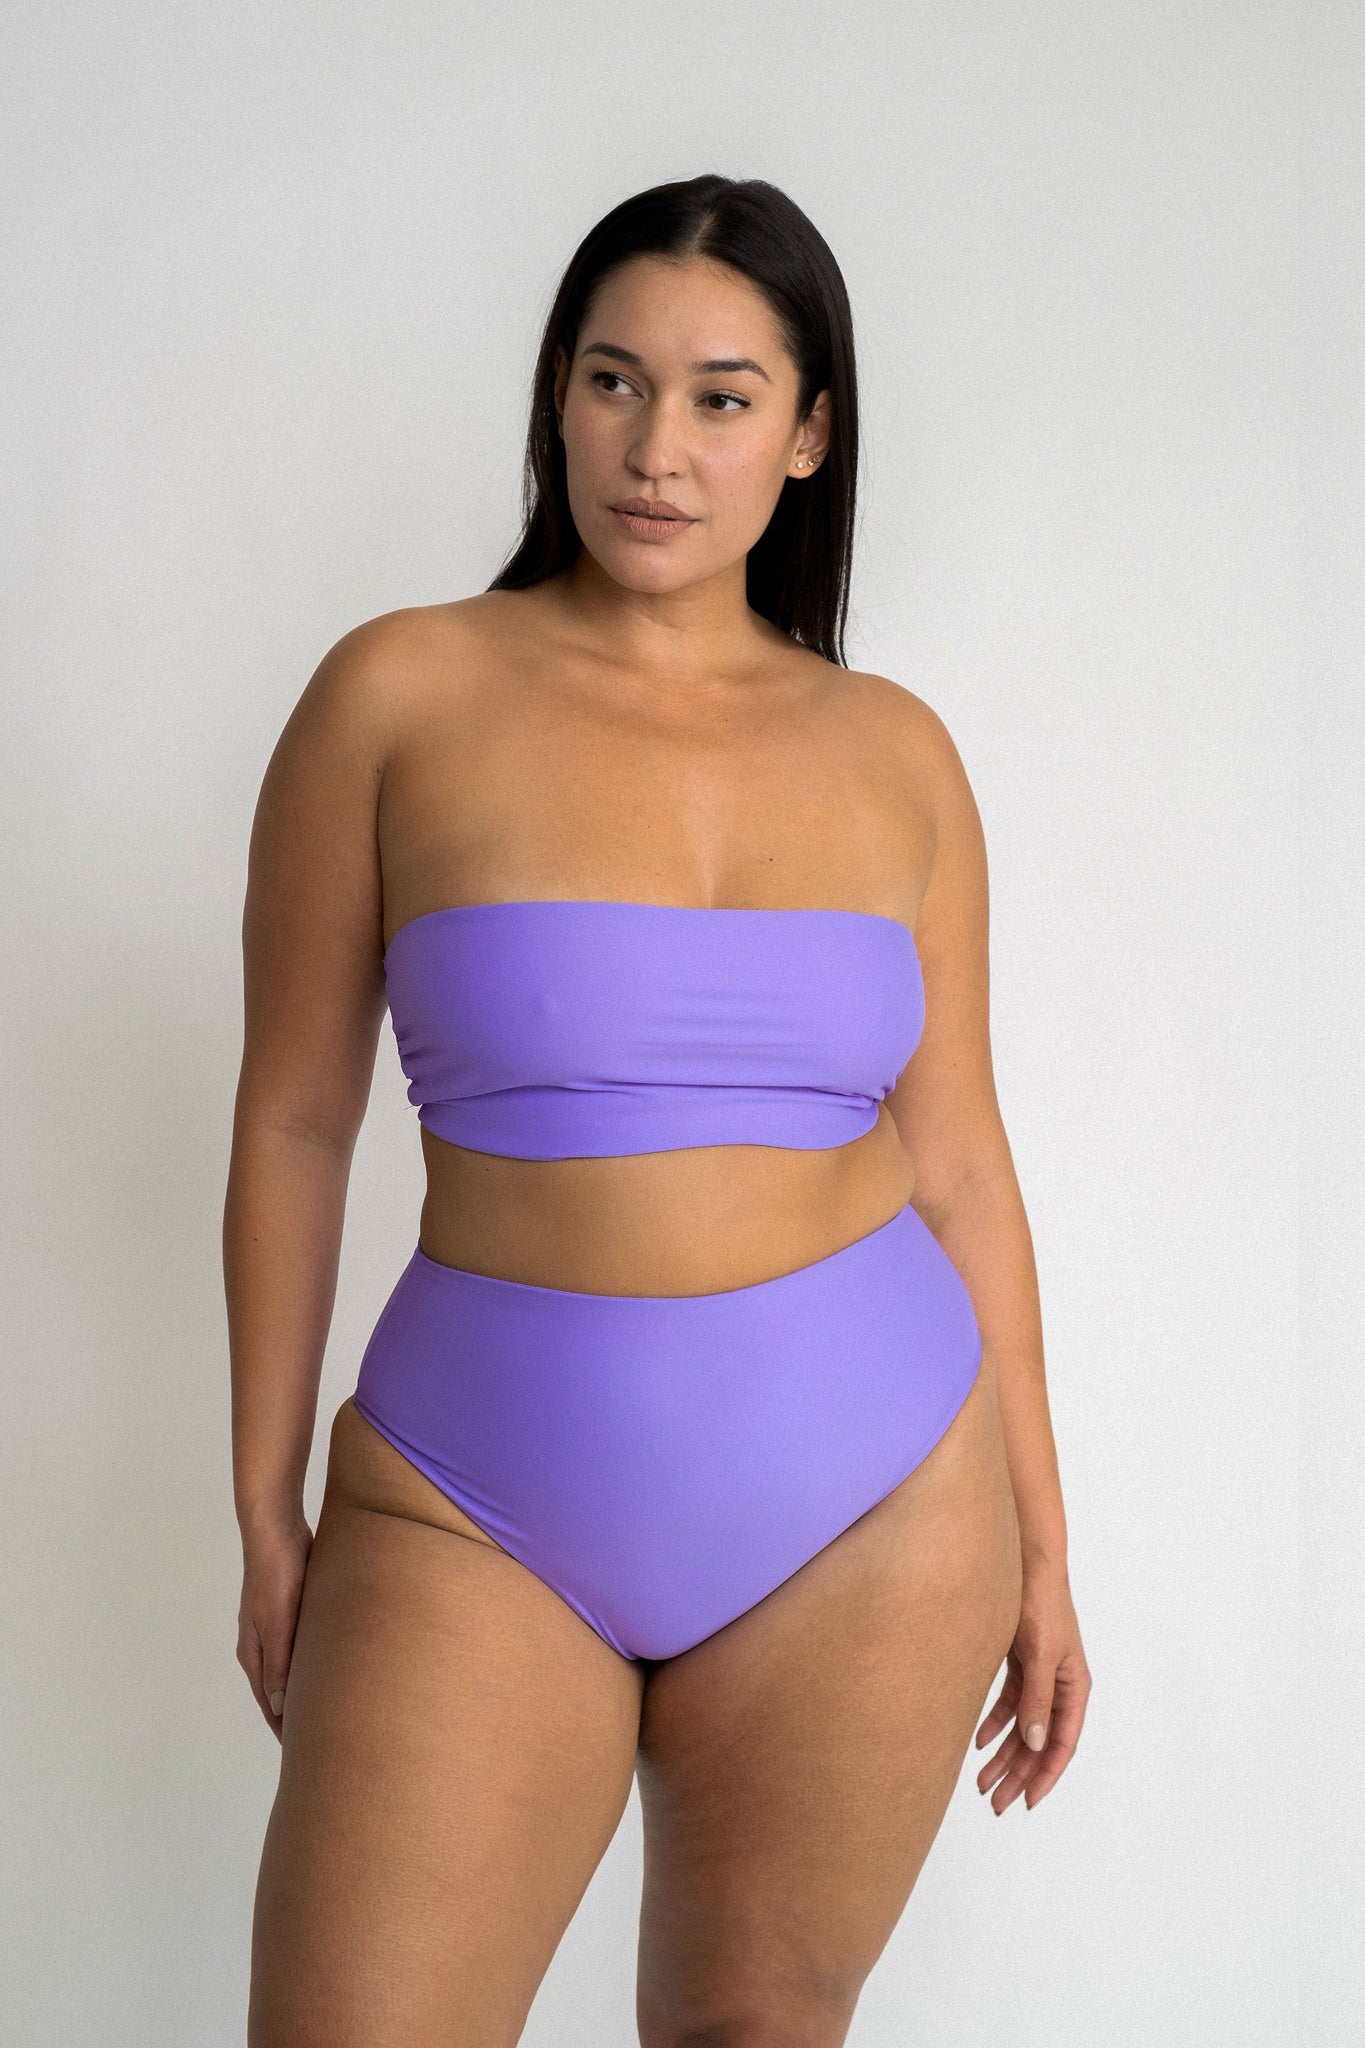 Woman standing in front of a white wall wearing bright purple high waisted bikini bottoms with a matching bright purple bandeau bikini top.